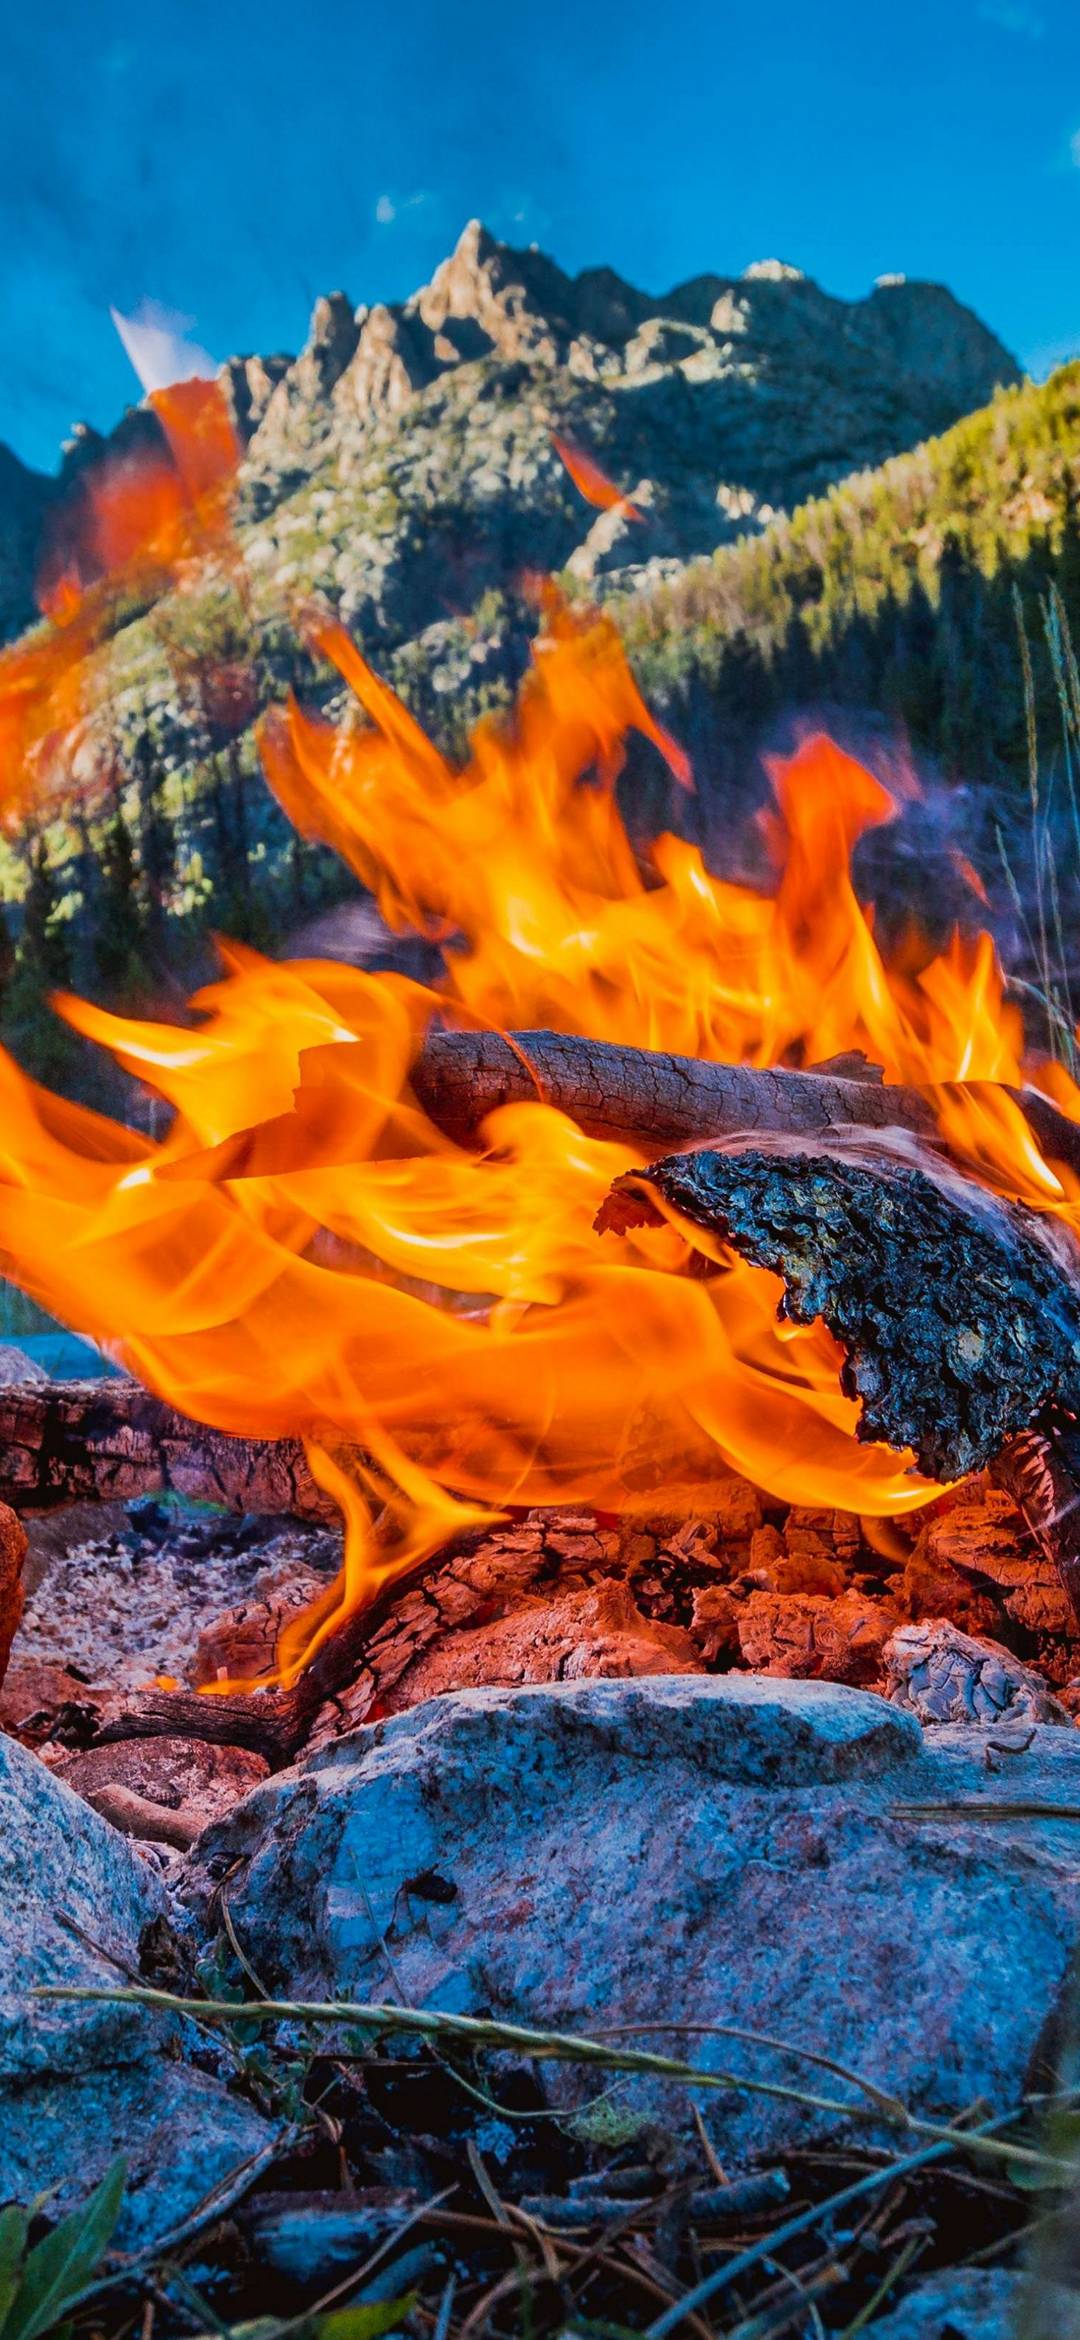 flame-with-stones-on-rock-wallpaper-1080x2340